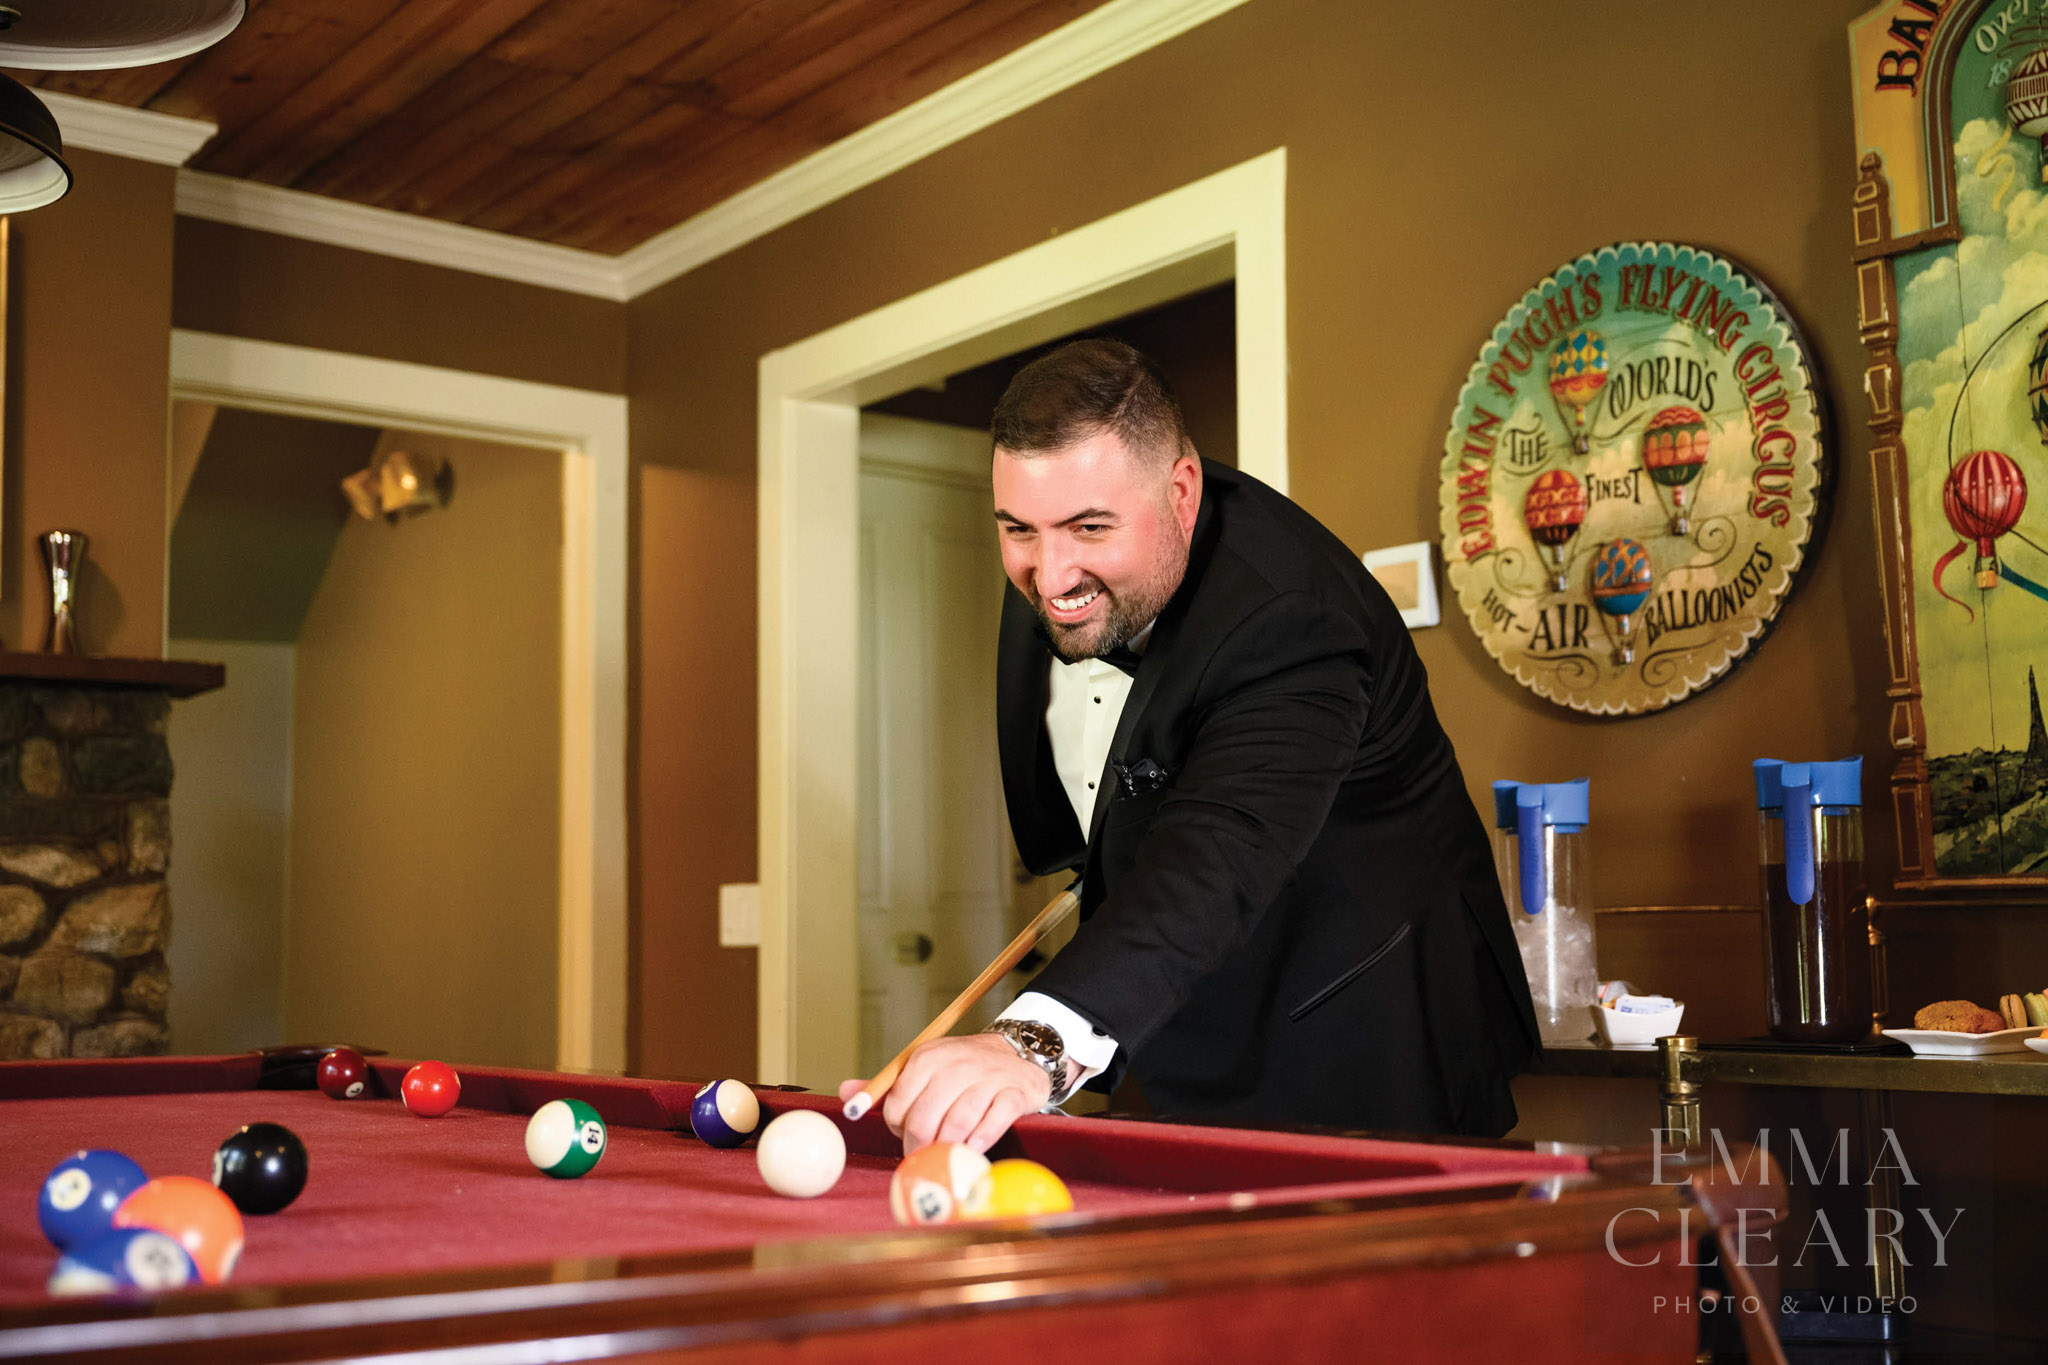 The groom is playing billiards